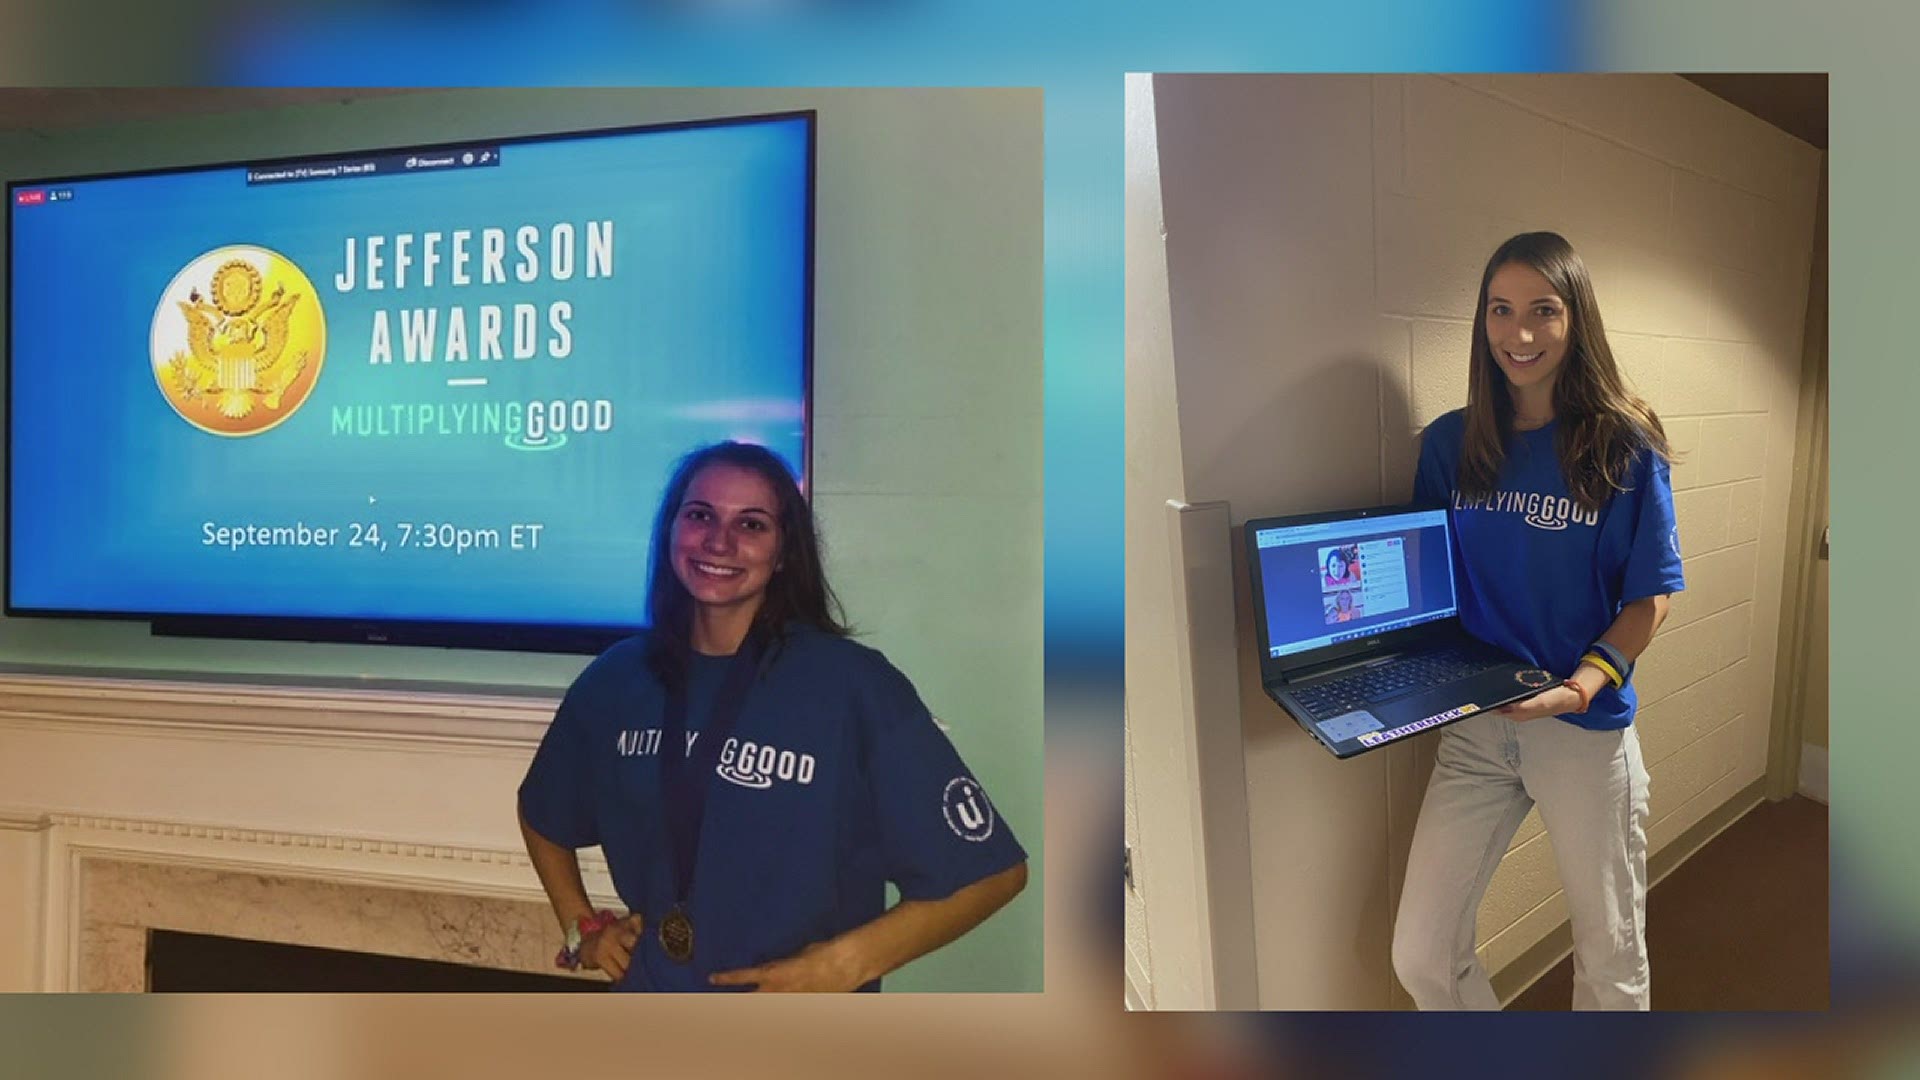 Amber and Amy Haskill, Founders of Closet2Closet, are WQAD's 2020 Finalists of the Jefferson Awards